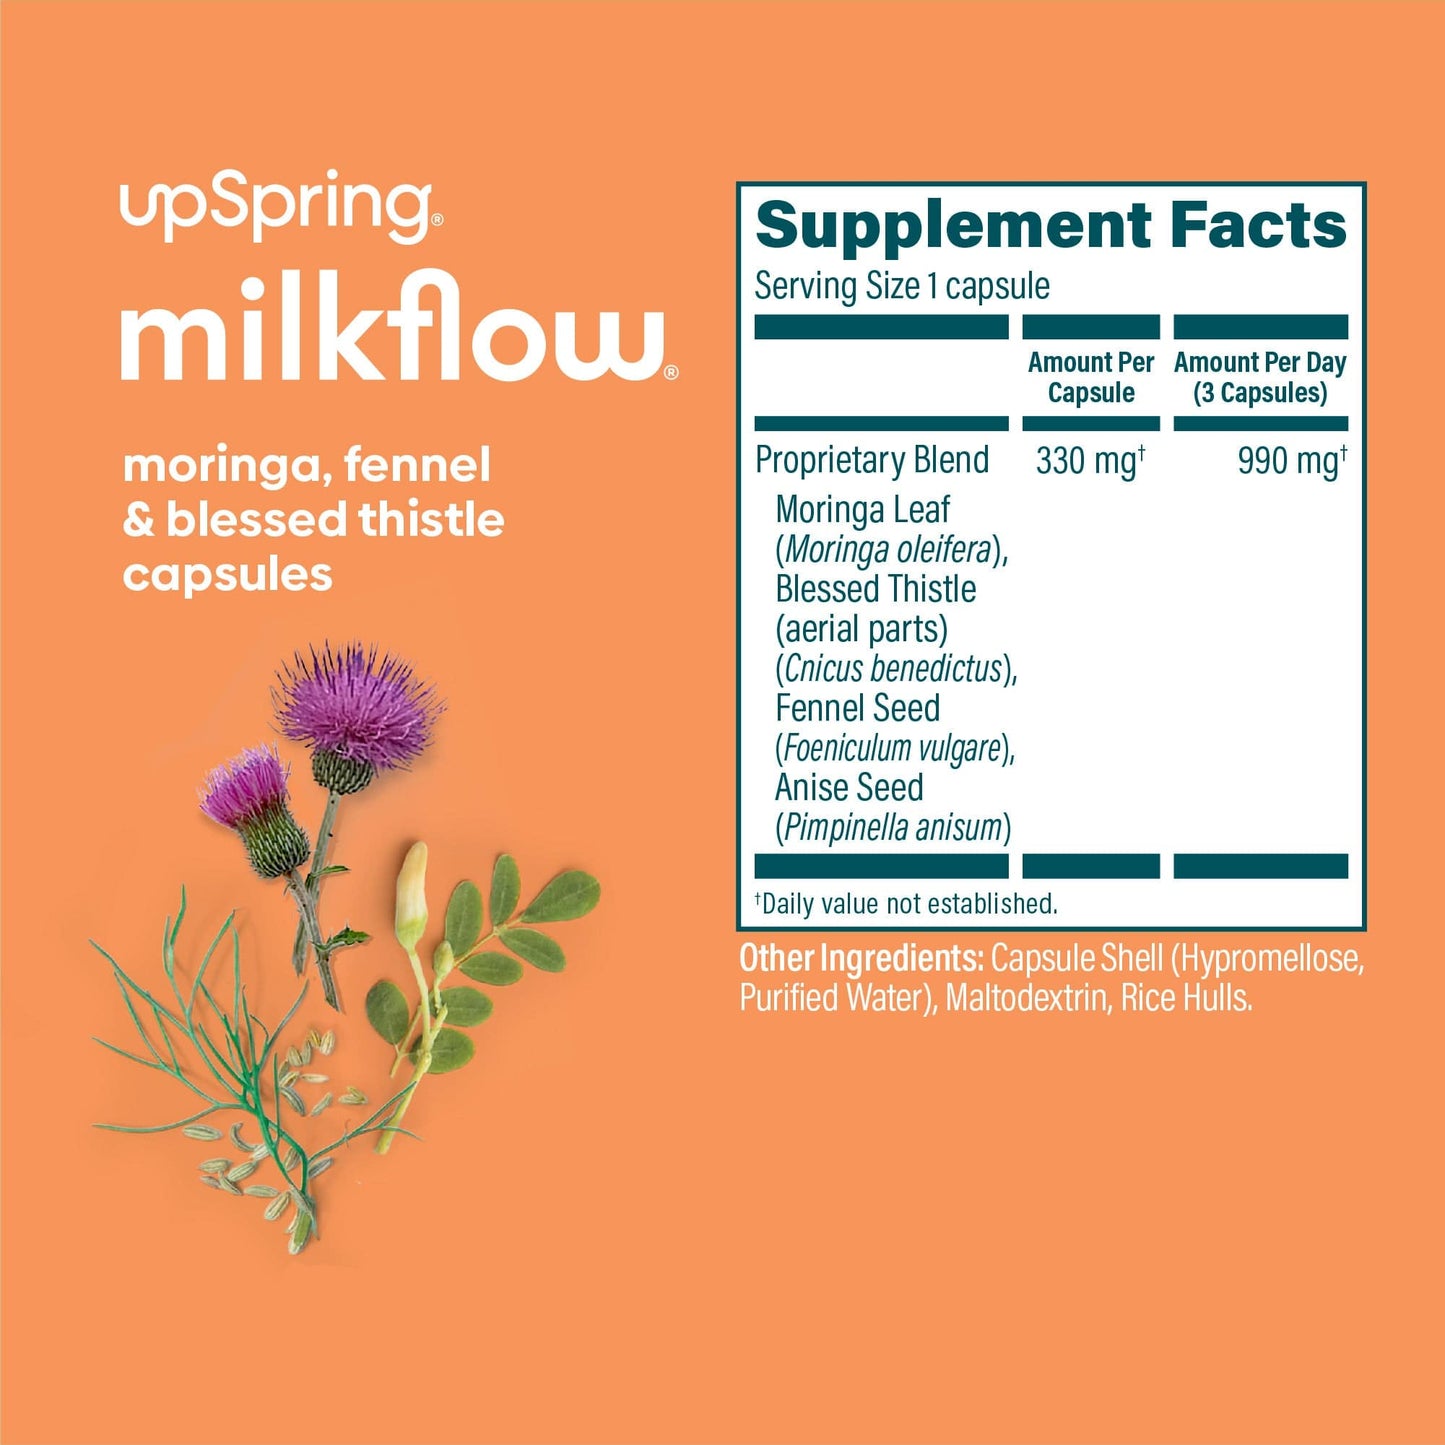 The supplement fact and ingredient panel information for MilkFlow Moringa, Fennel, and Blessed Thistle capsules